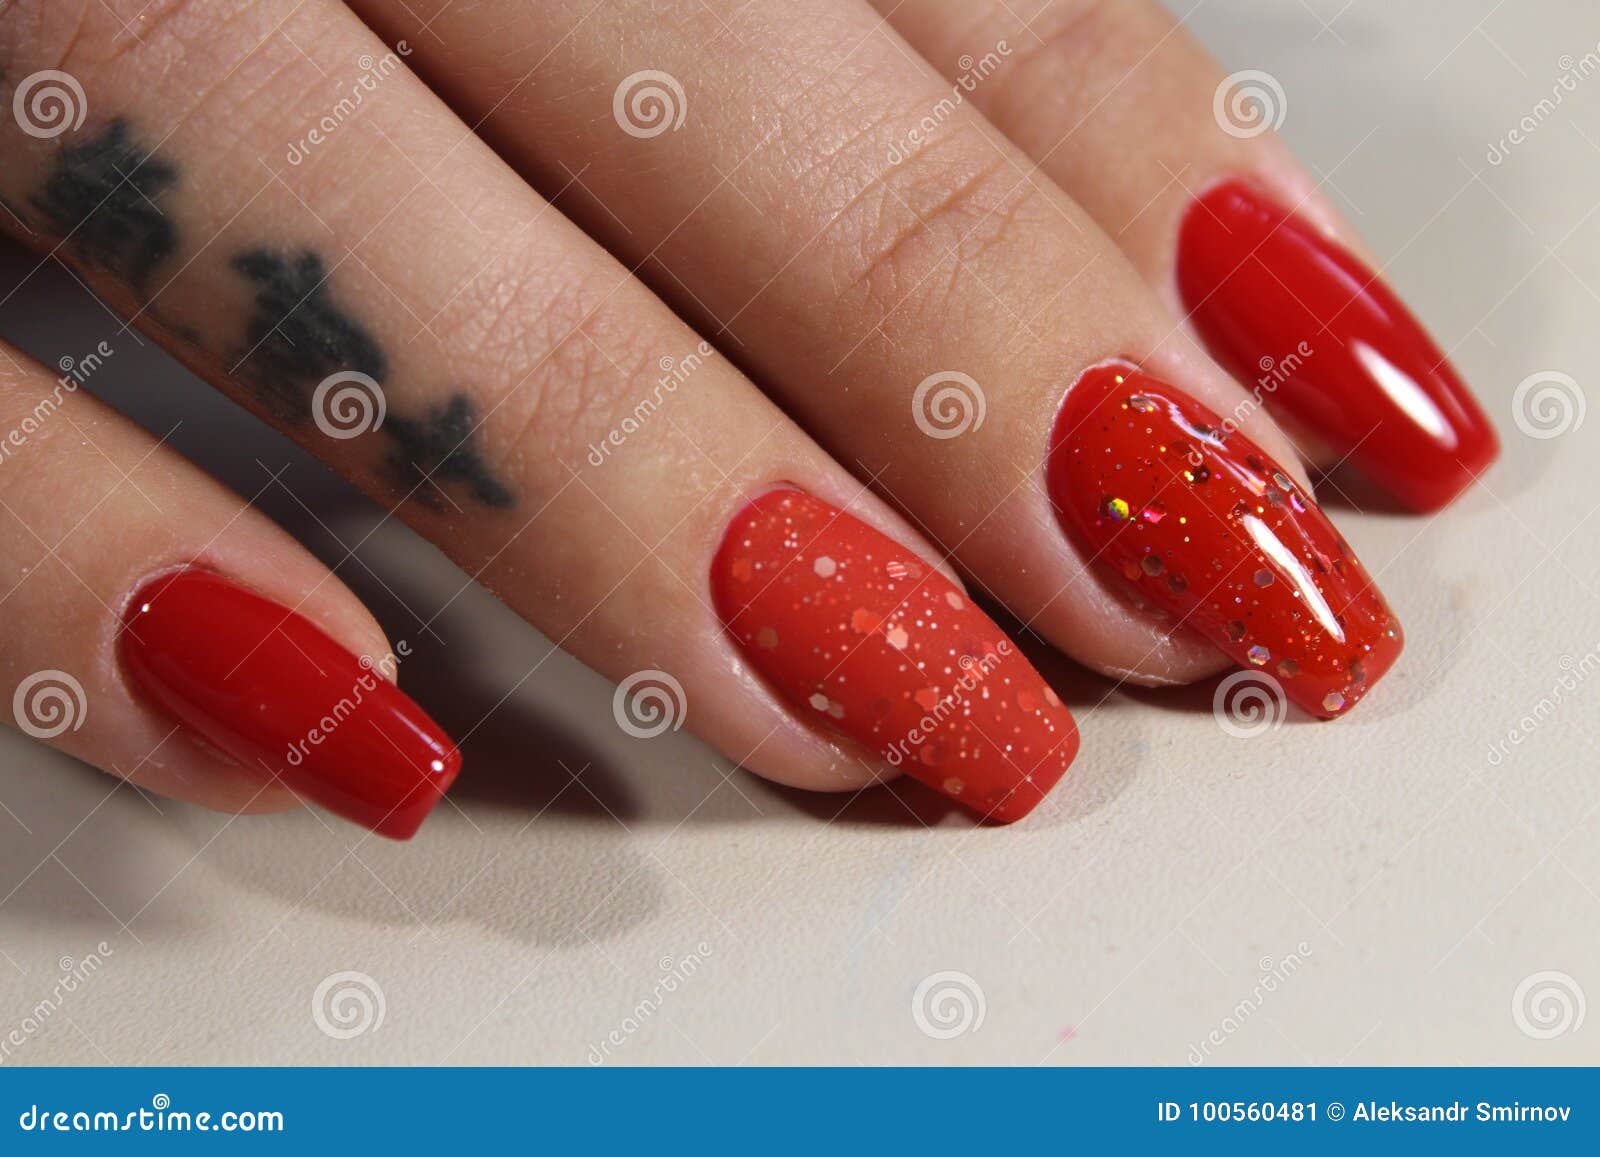 50+ Beautiful Nail Art Ideas for Red Manicure | Christmas nails acrylic,  Stylish nails, Cute nails